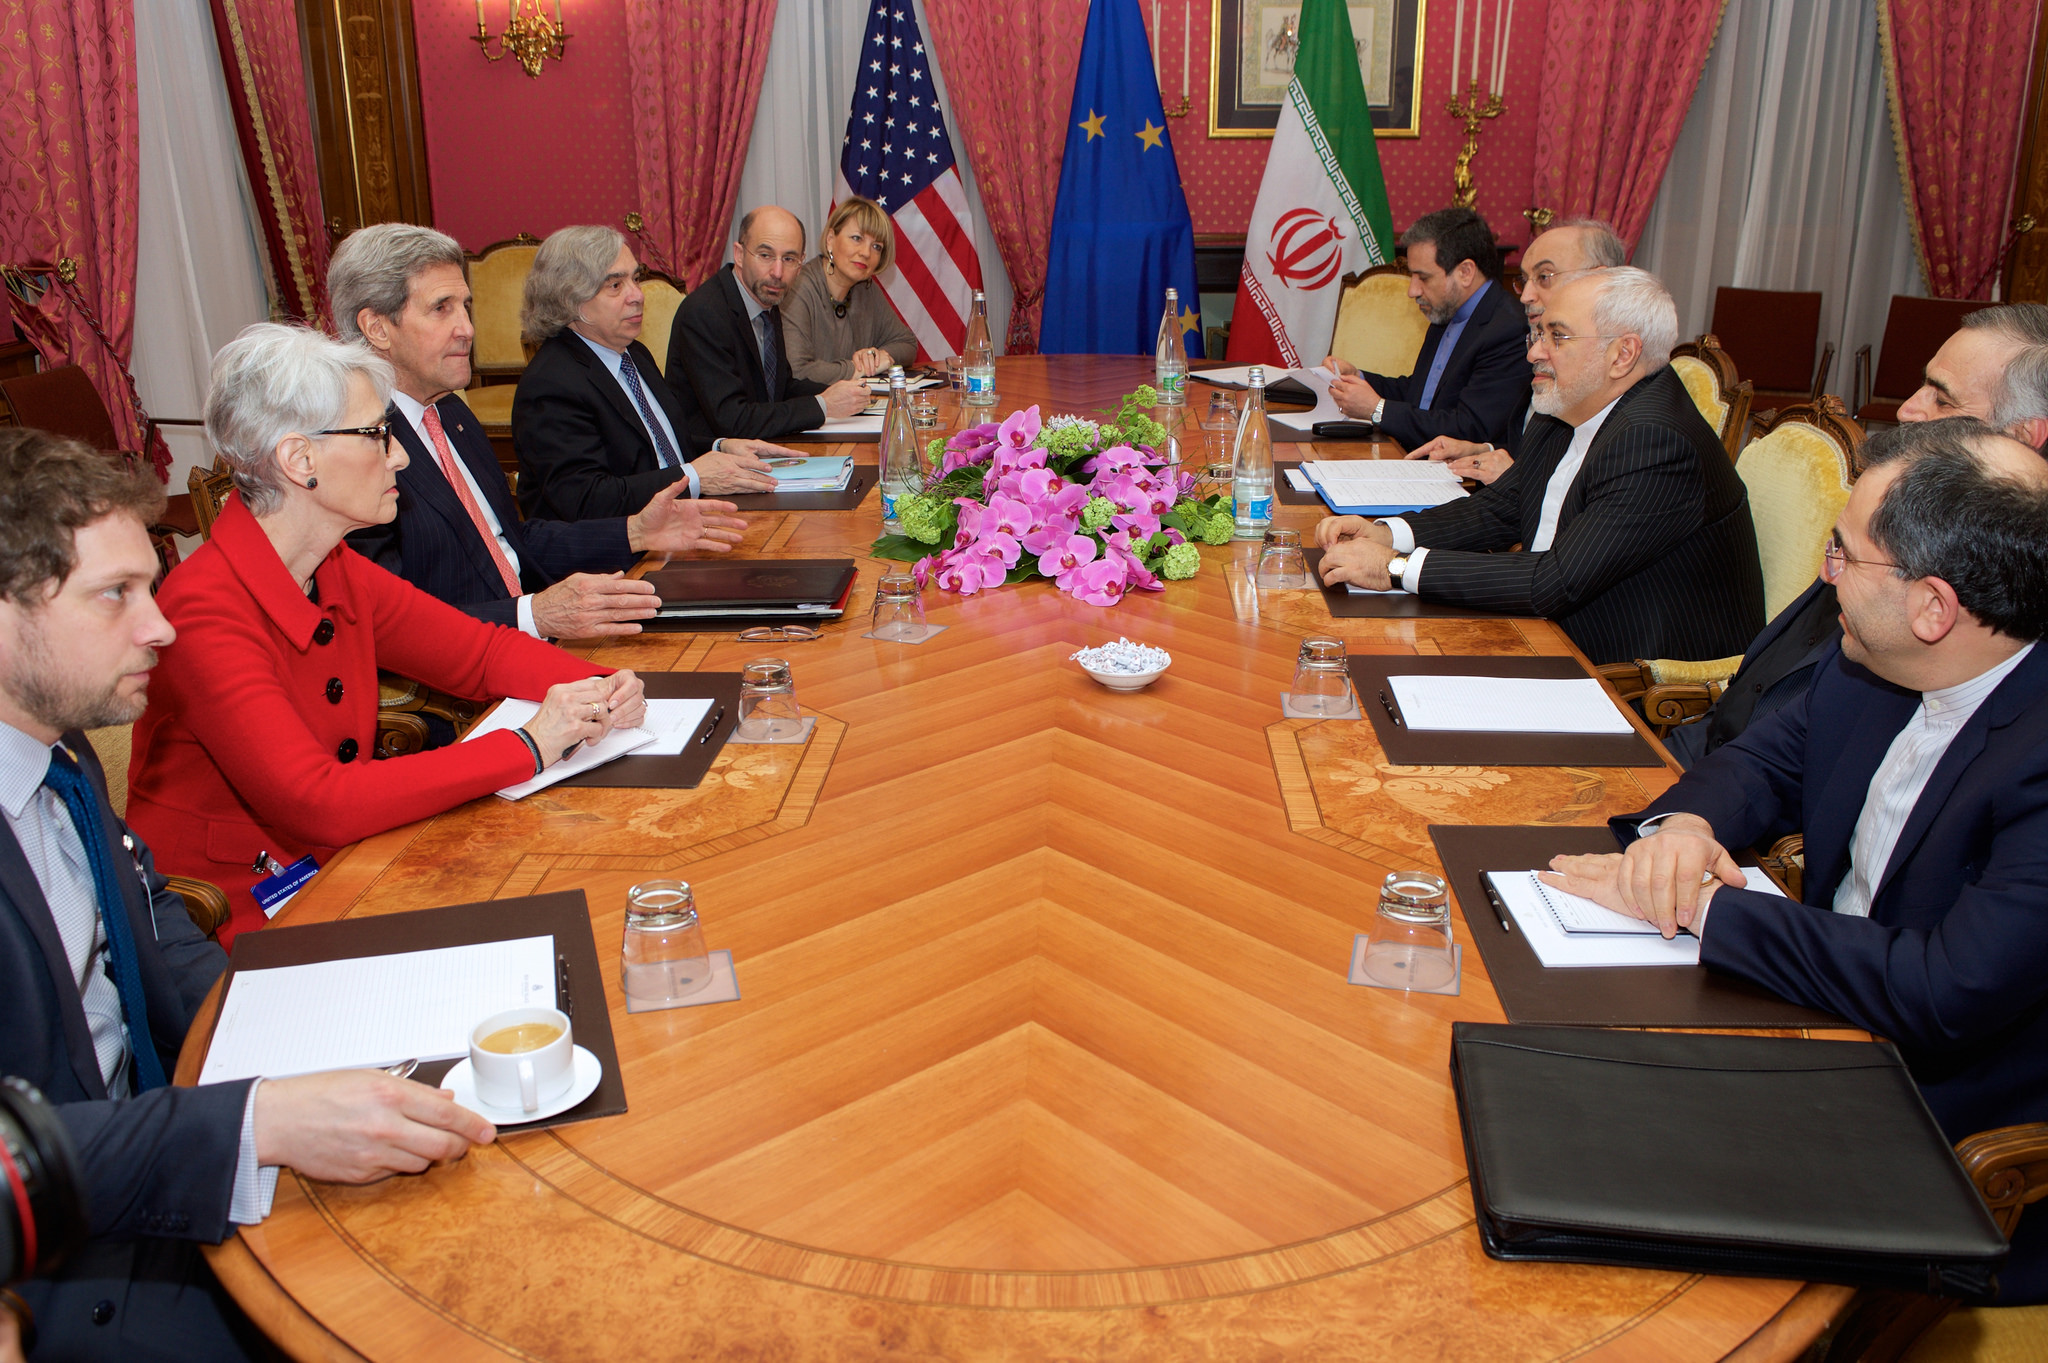 At the negotiating table in Lausanne, Switzerland. Photo from the US State Department